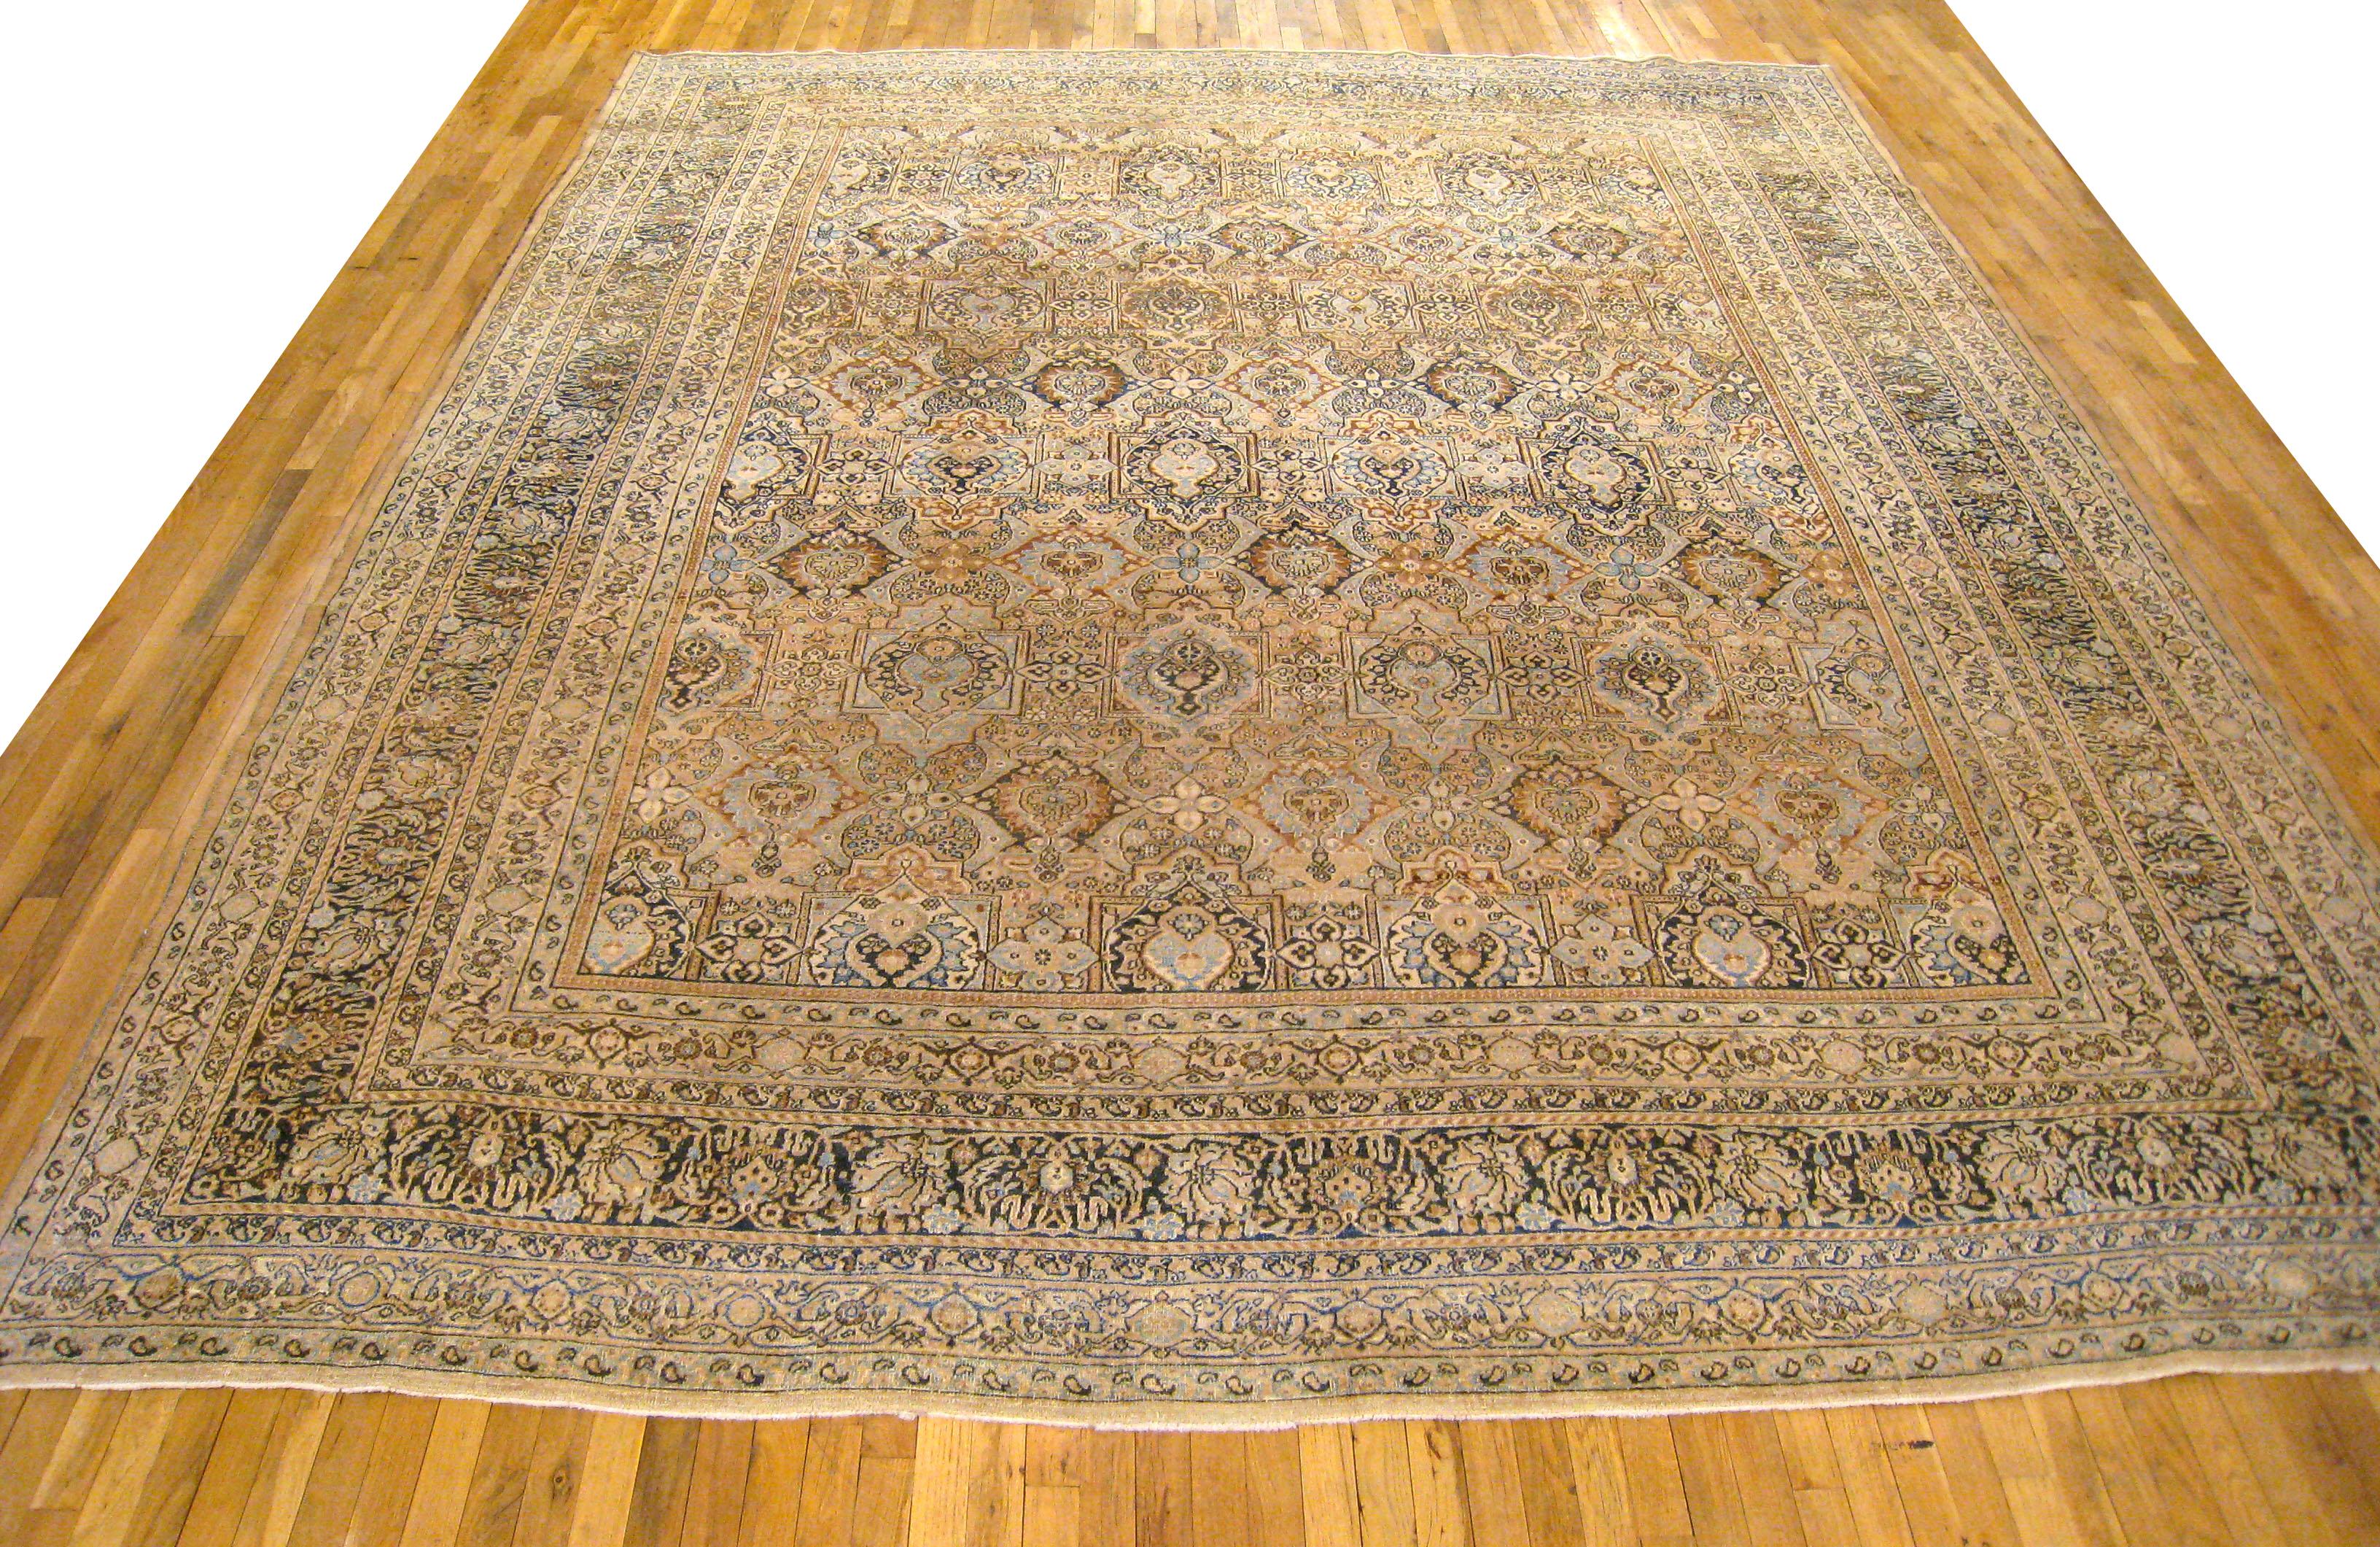 Antique Persian Meshed Oriental rug, Large size

An antique Persian Meshed oriental rug, size 13'4 x 10'7, circa 1910. This handsome hand-woven geometric rug features floral elements allover the brown field. The central field is enclosed within an